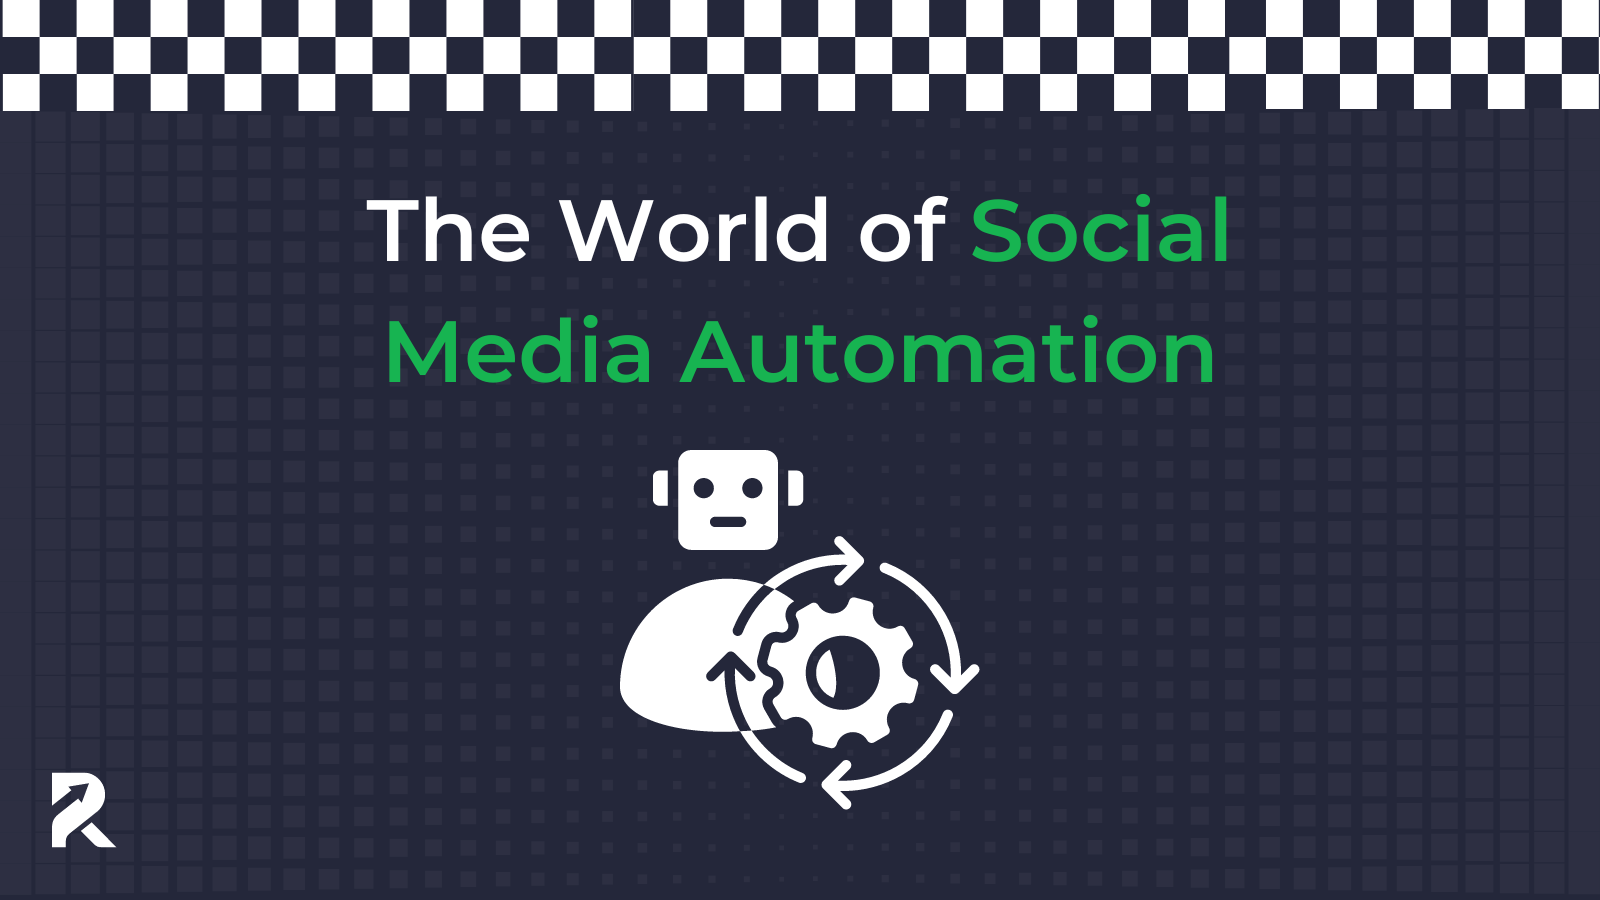 The World of Social Media Automation